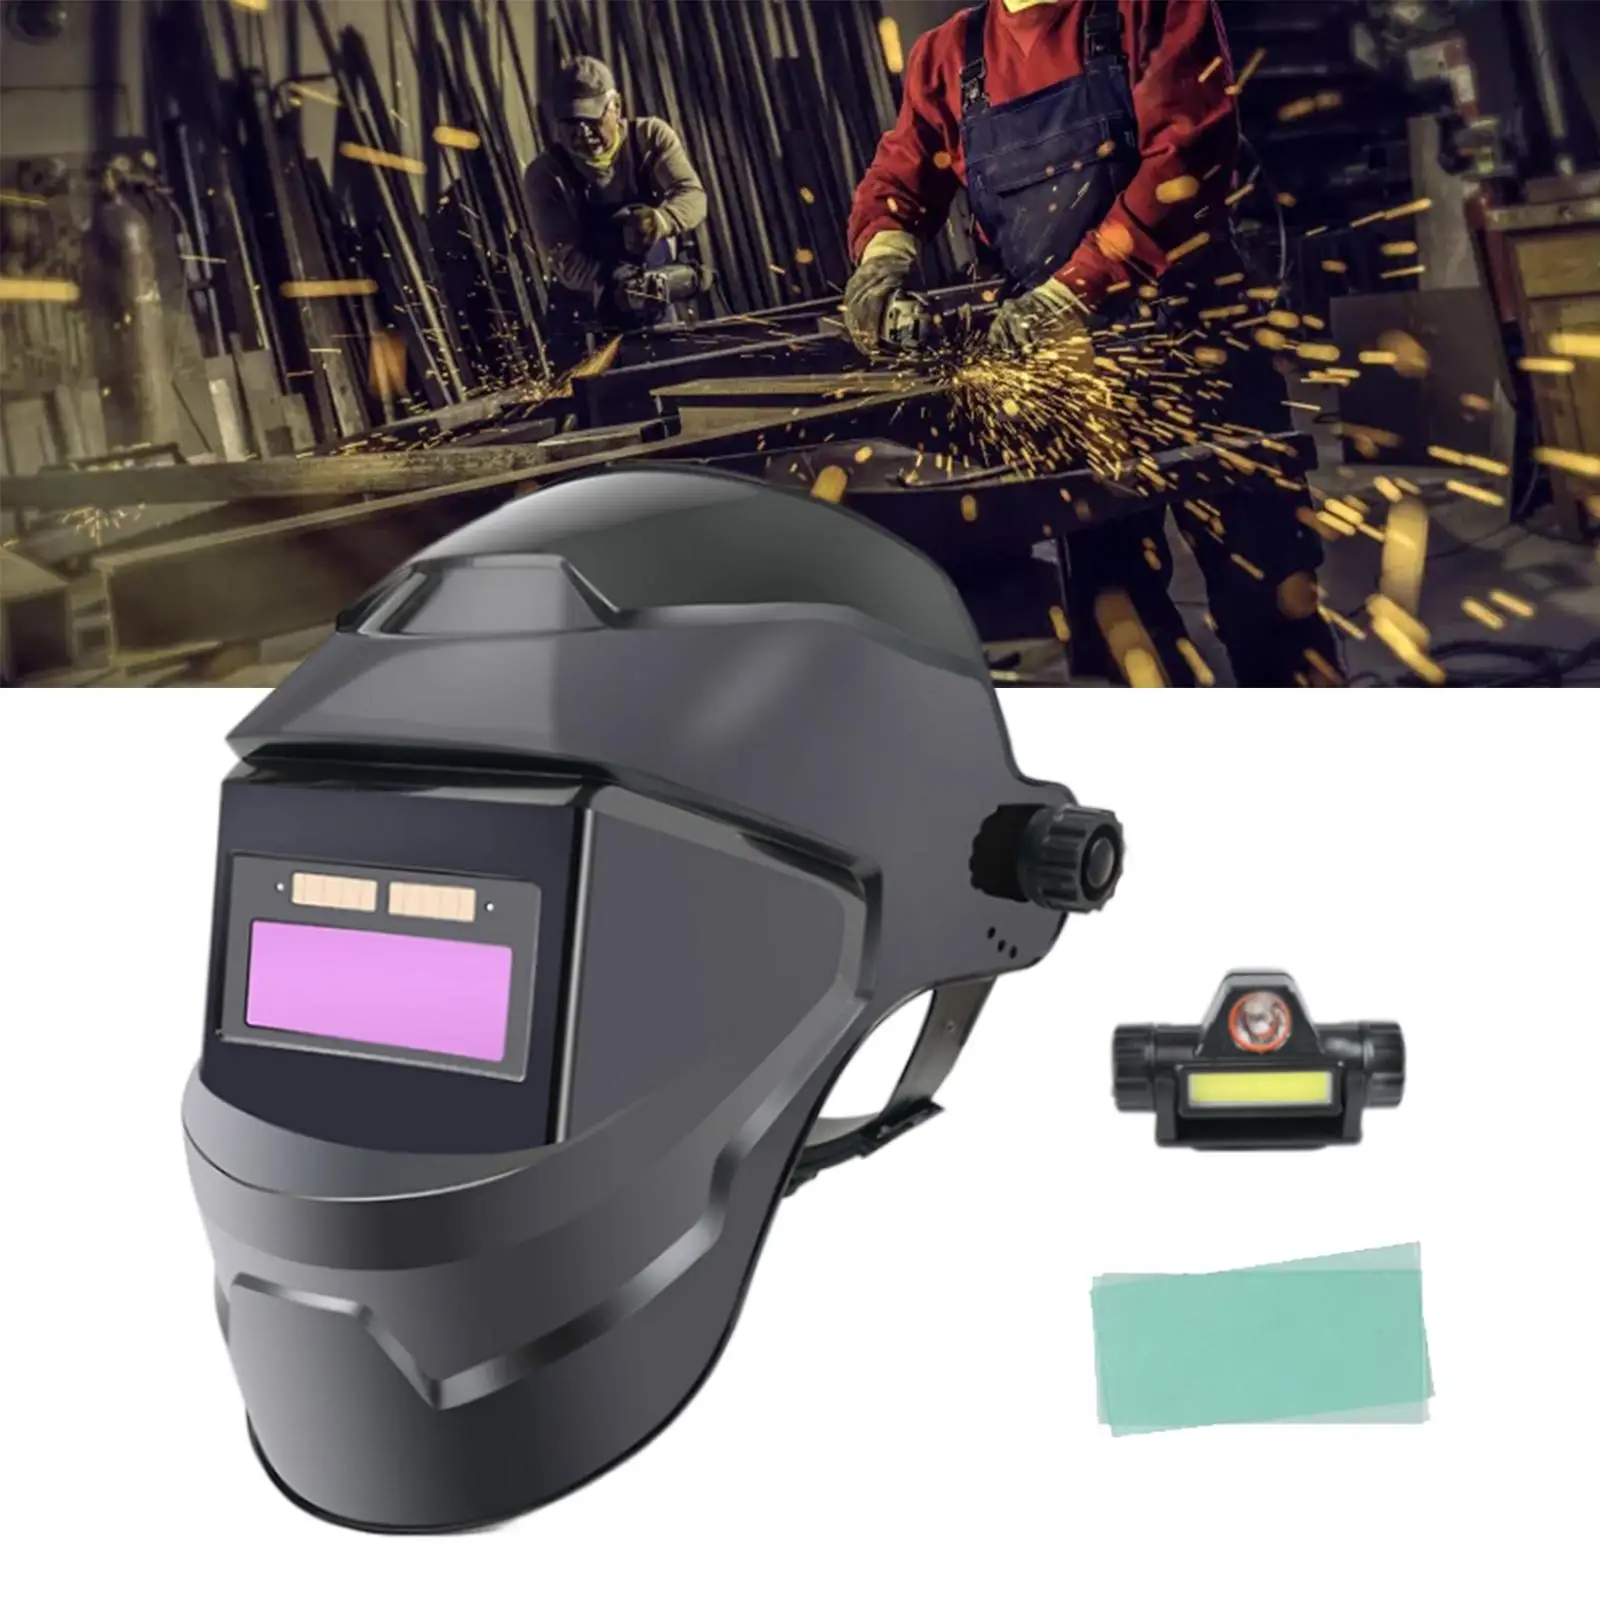 Solar Powered Welding Mask Professional Large Field of View Solar Power Large Viewing Electric Welding Cap Weld Hood Helmet